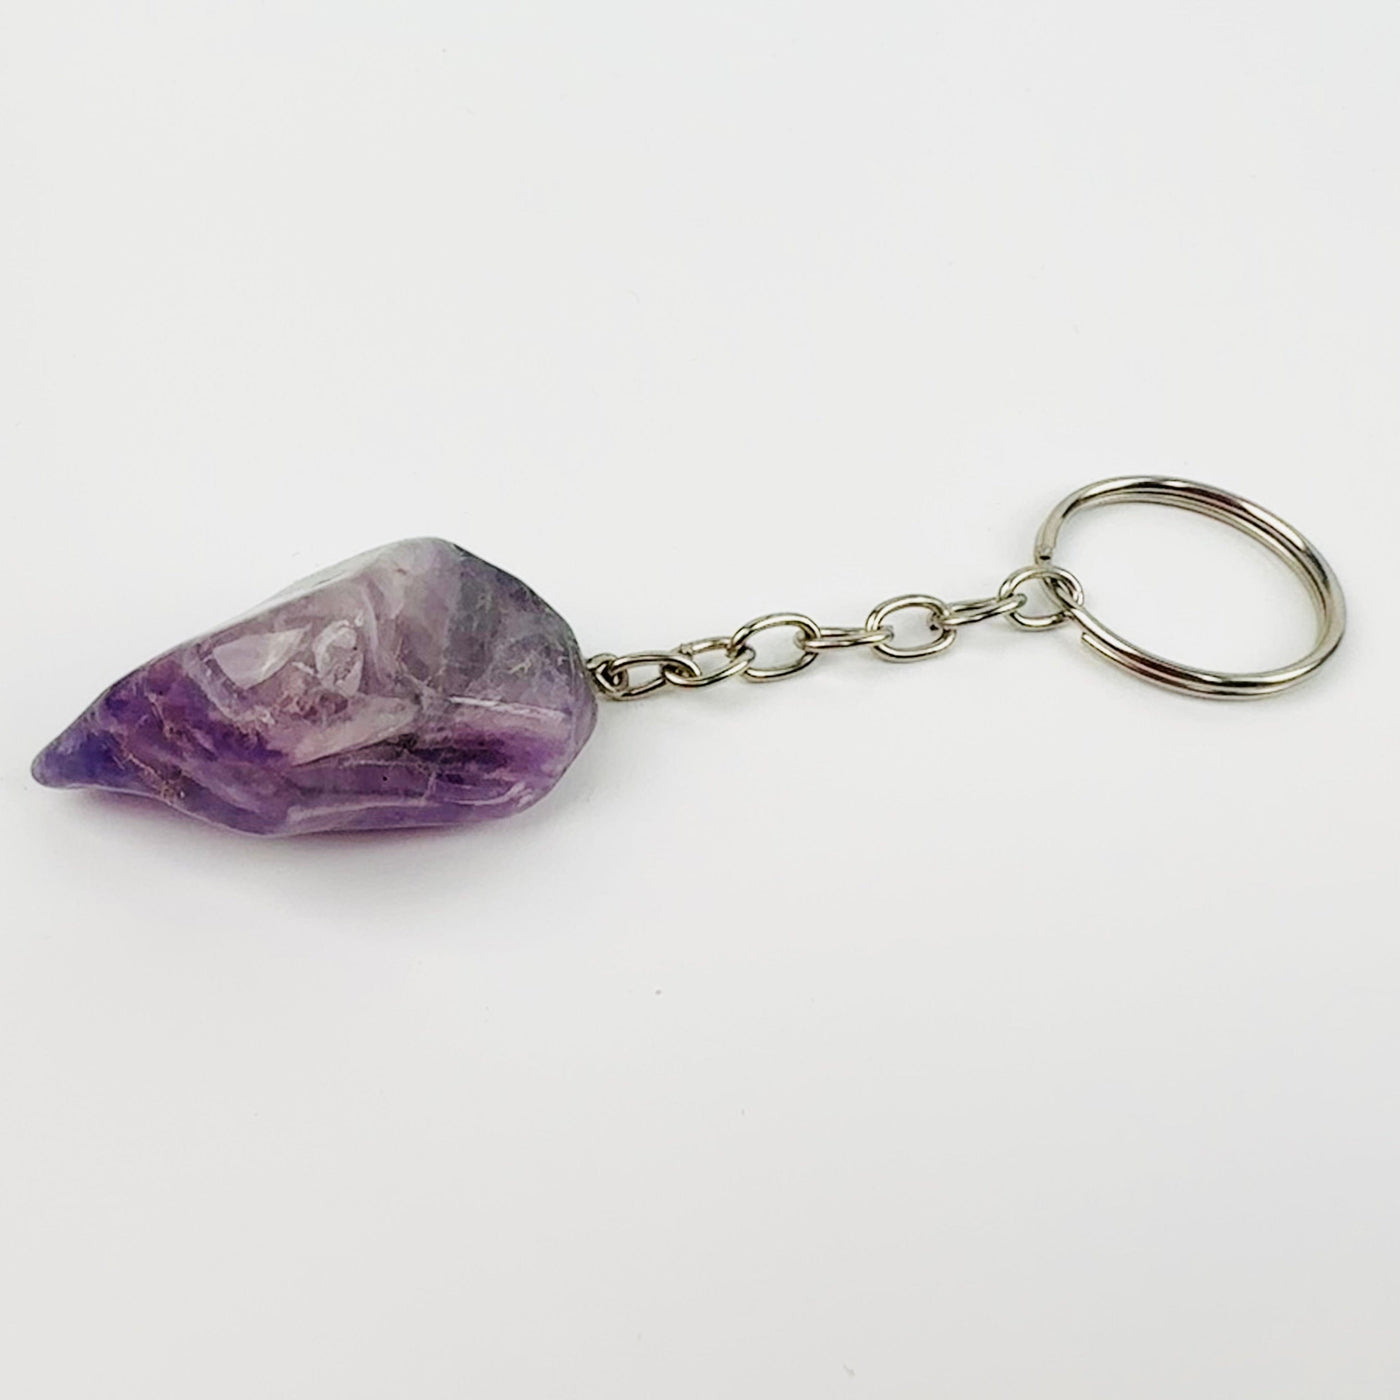 Amethyst Polished Freeform Silver Toned Key Chain - Tumbled Purple Stone - up close of one key chain